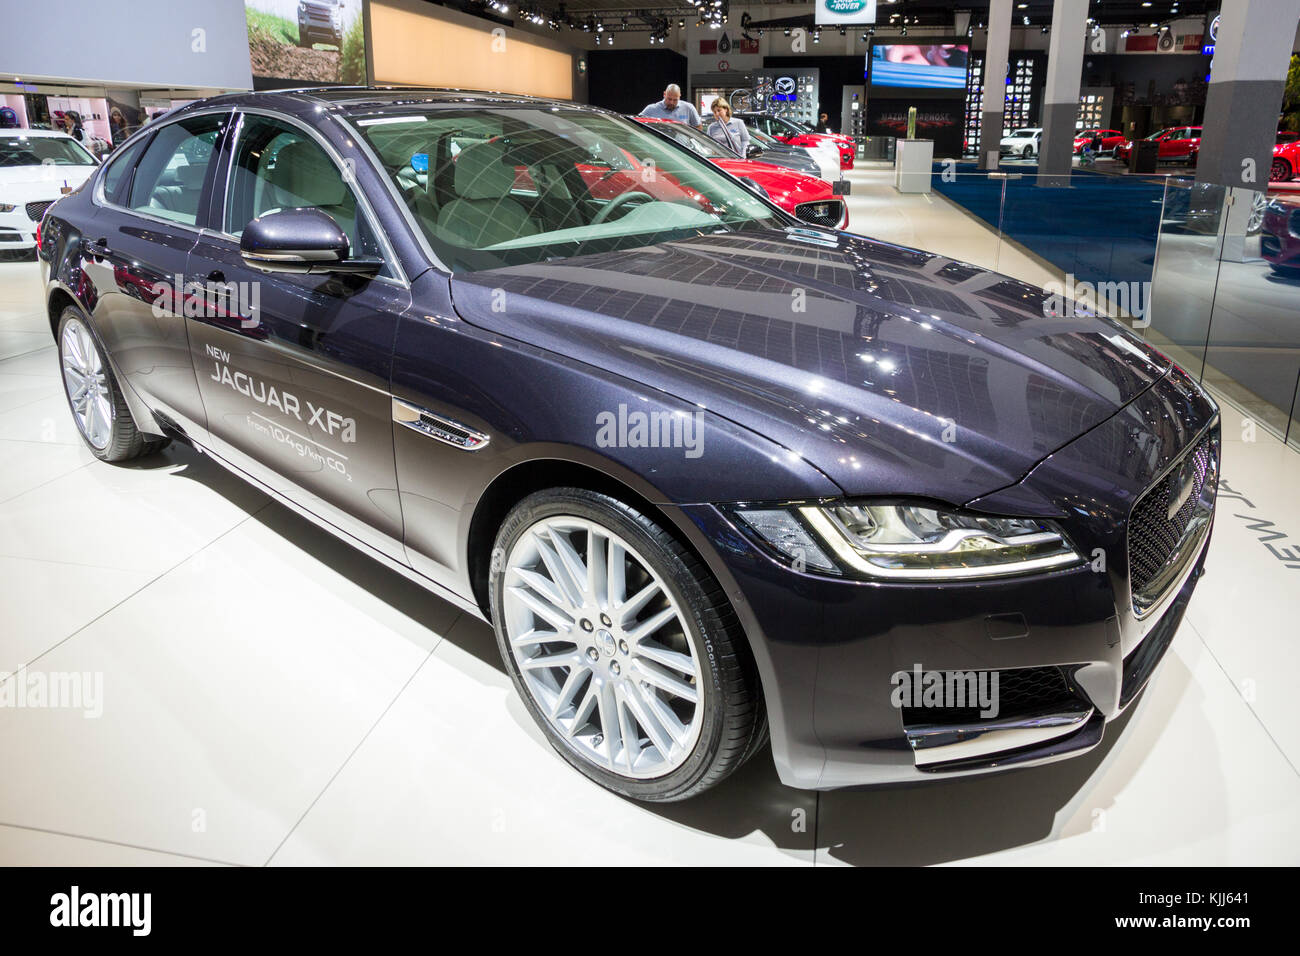 BRUSSELS - JAN 12, 2016: Jaguar XF mid-size luxury car showcased at the Brussels Motor Show. Stock Photo